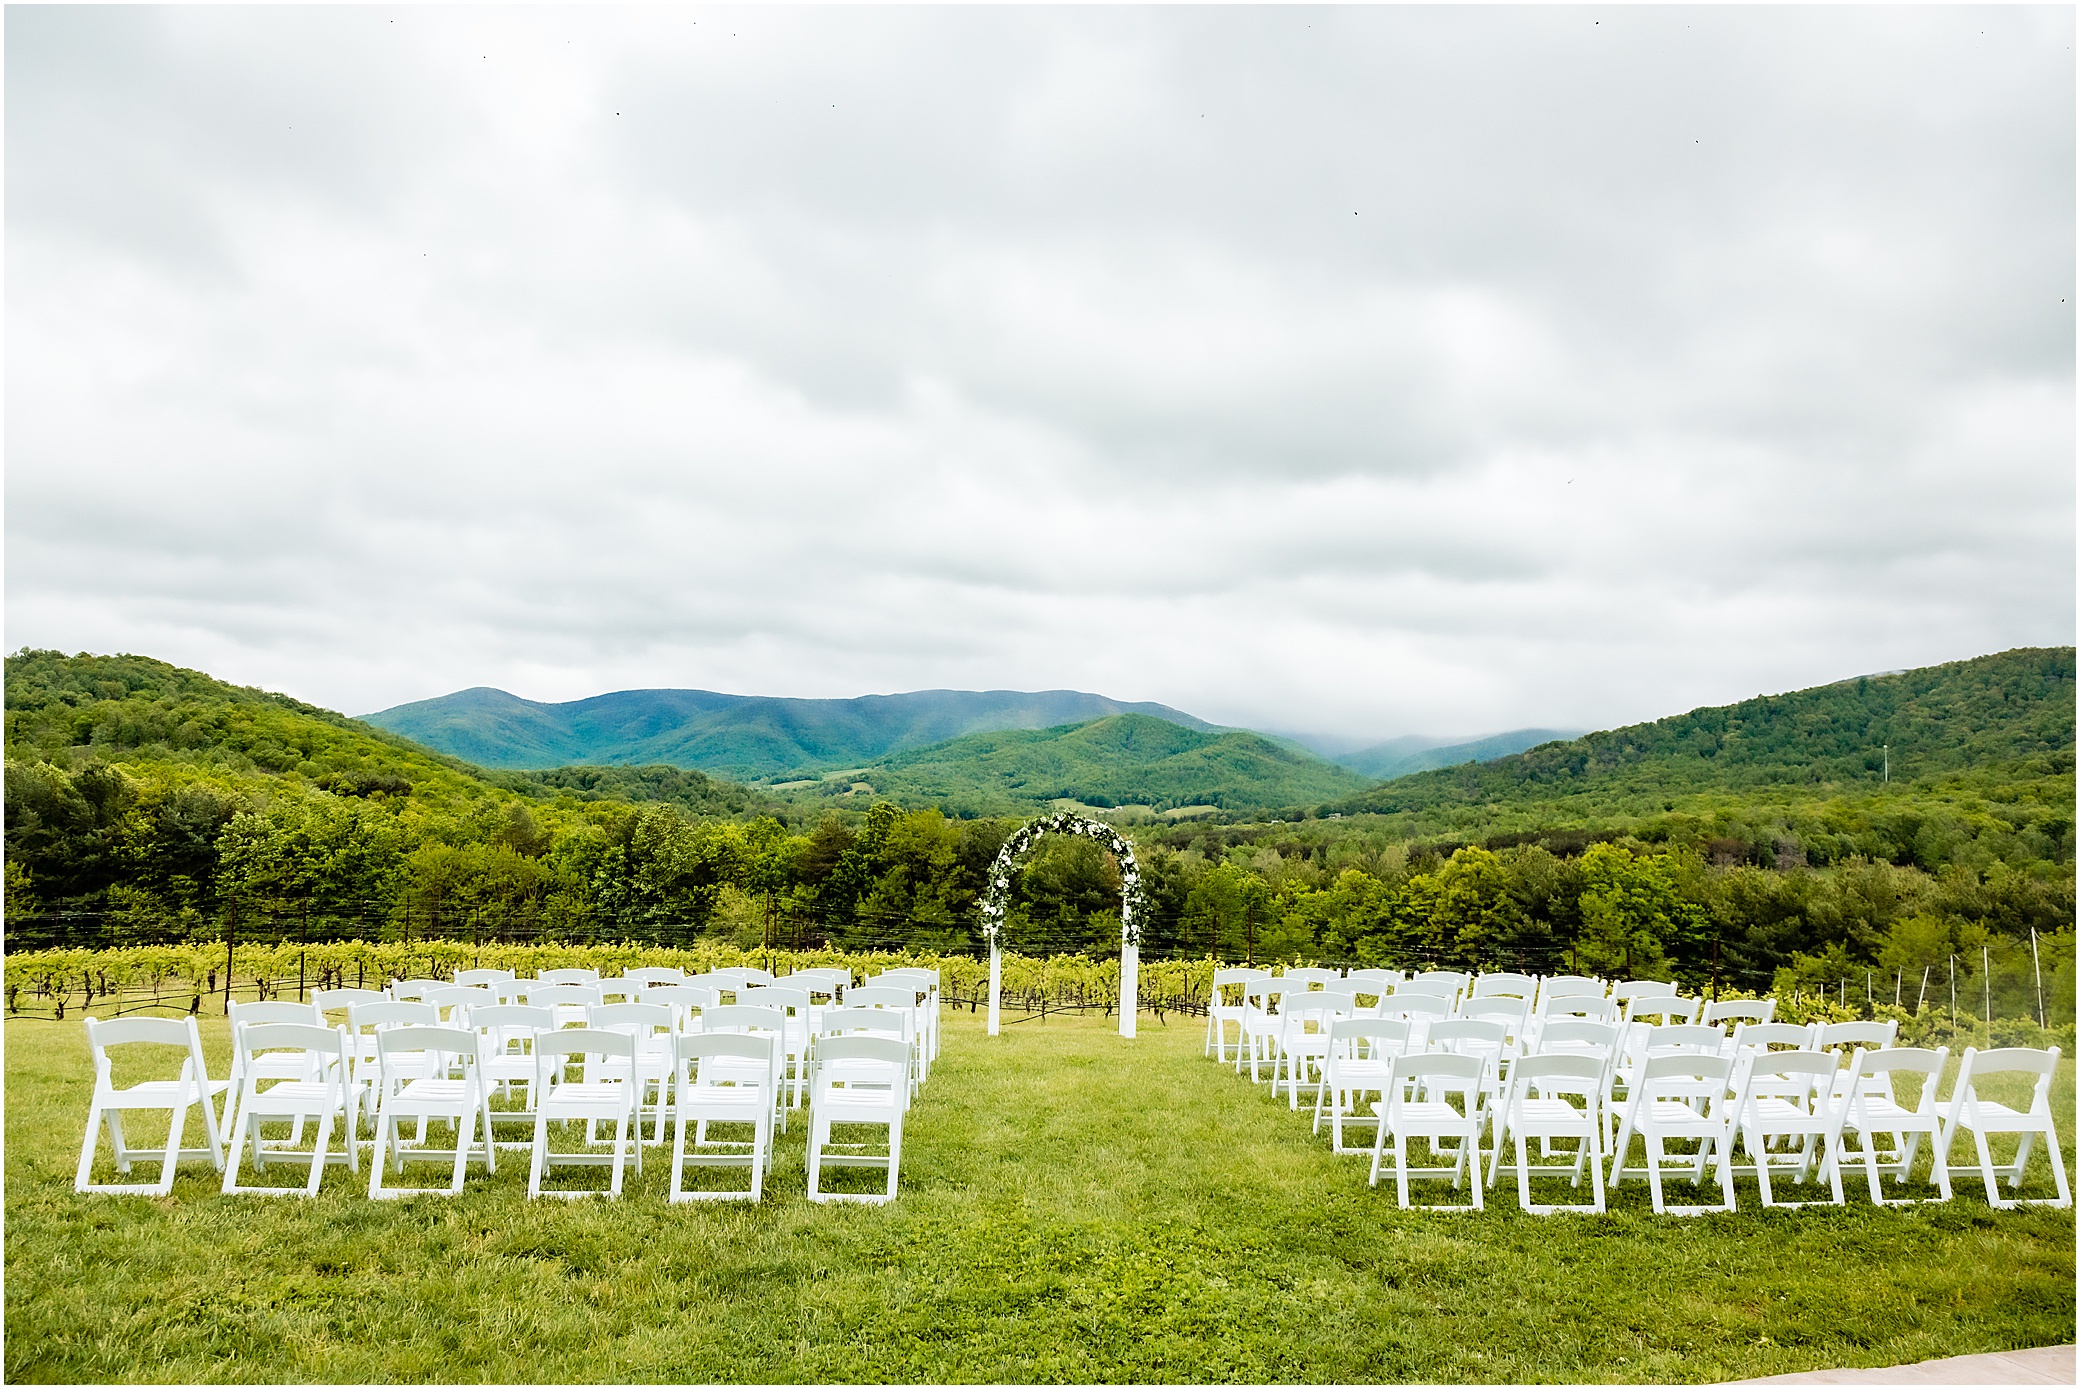 5 Tips for Choosing Your Wedding Venue